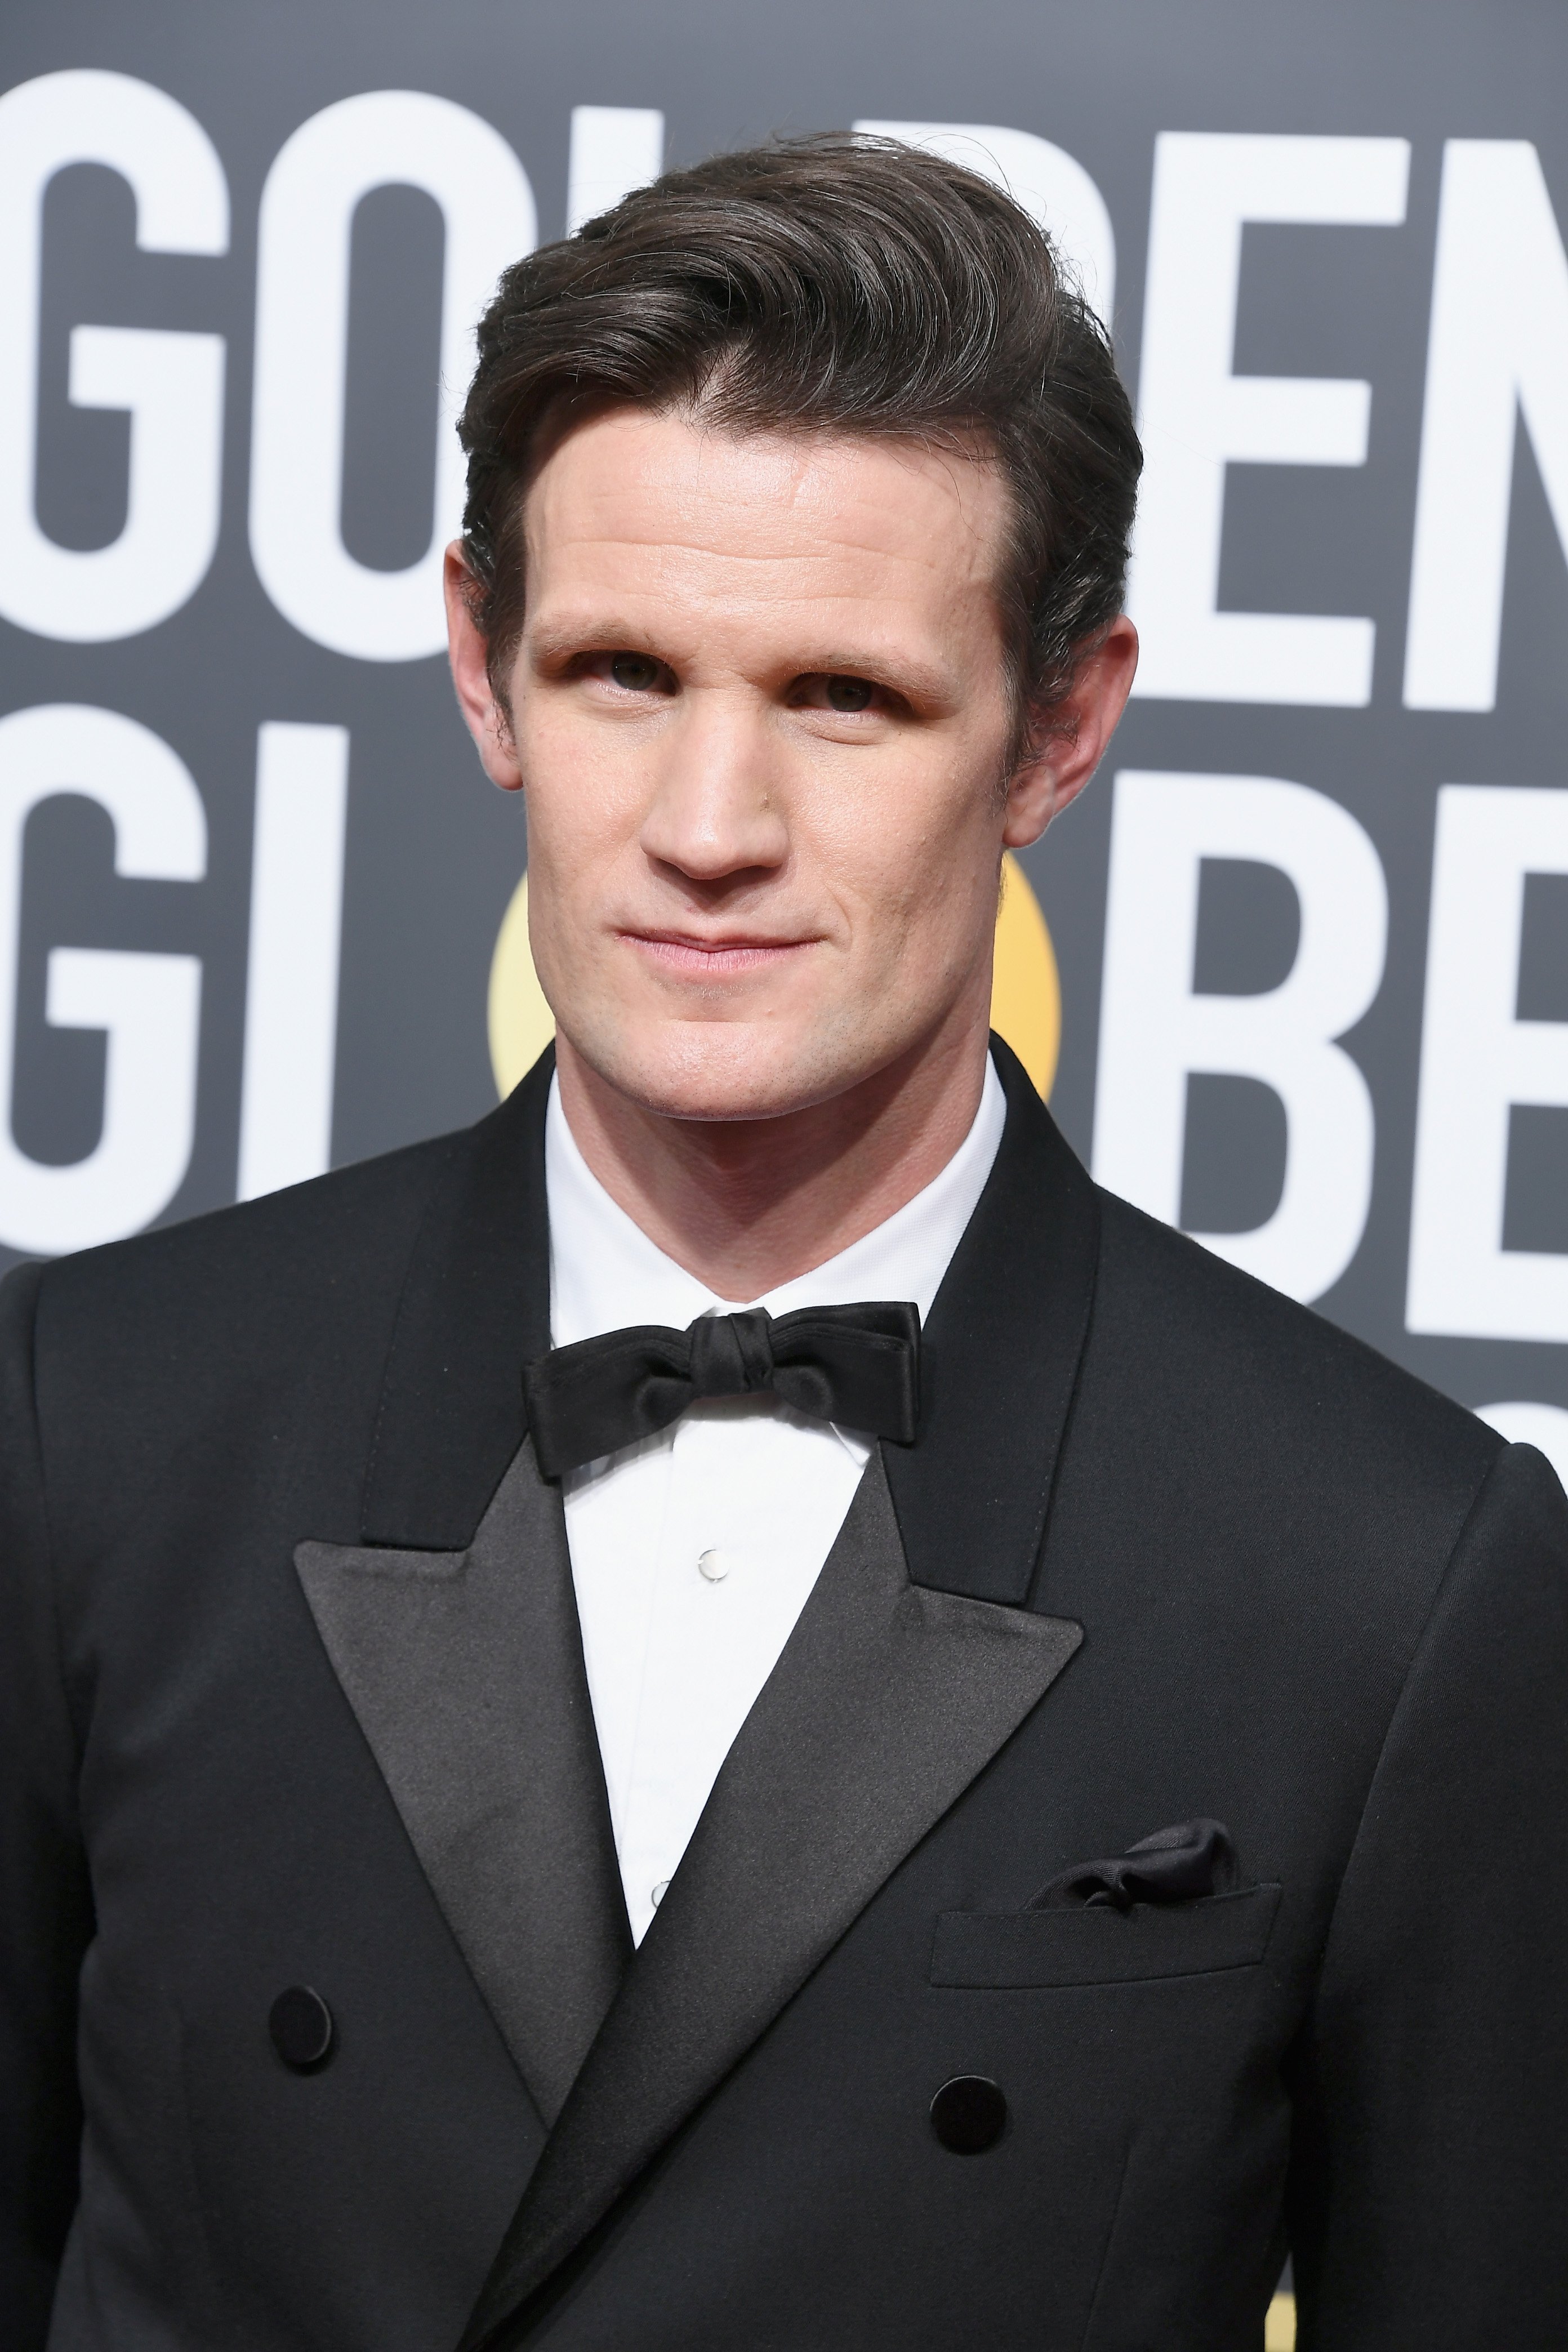 Actor Matt Smith attends The 75th Annual Golden Globe Awards at The Beverly Hilton Hotel on January 7, 2018 in Beverly Hills, California. | Source: Getty Images